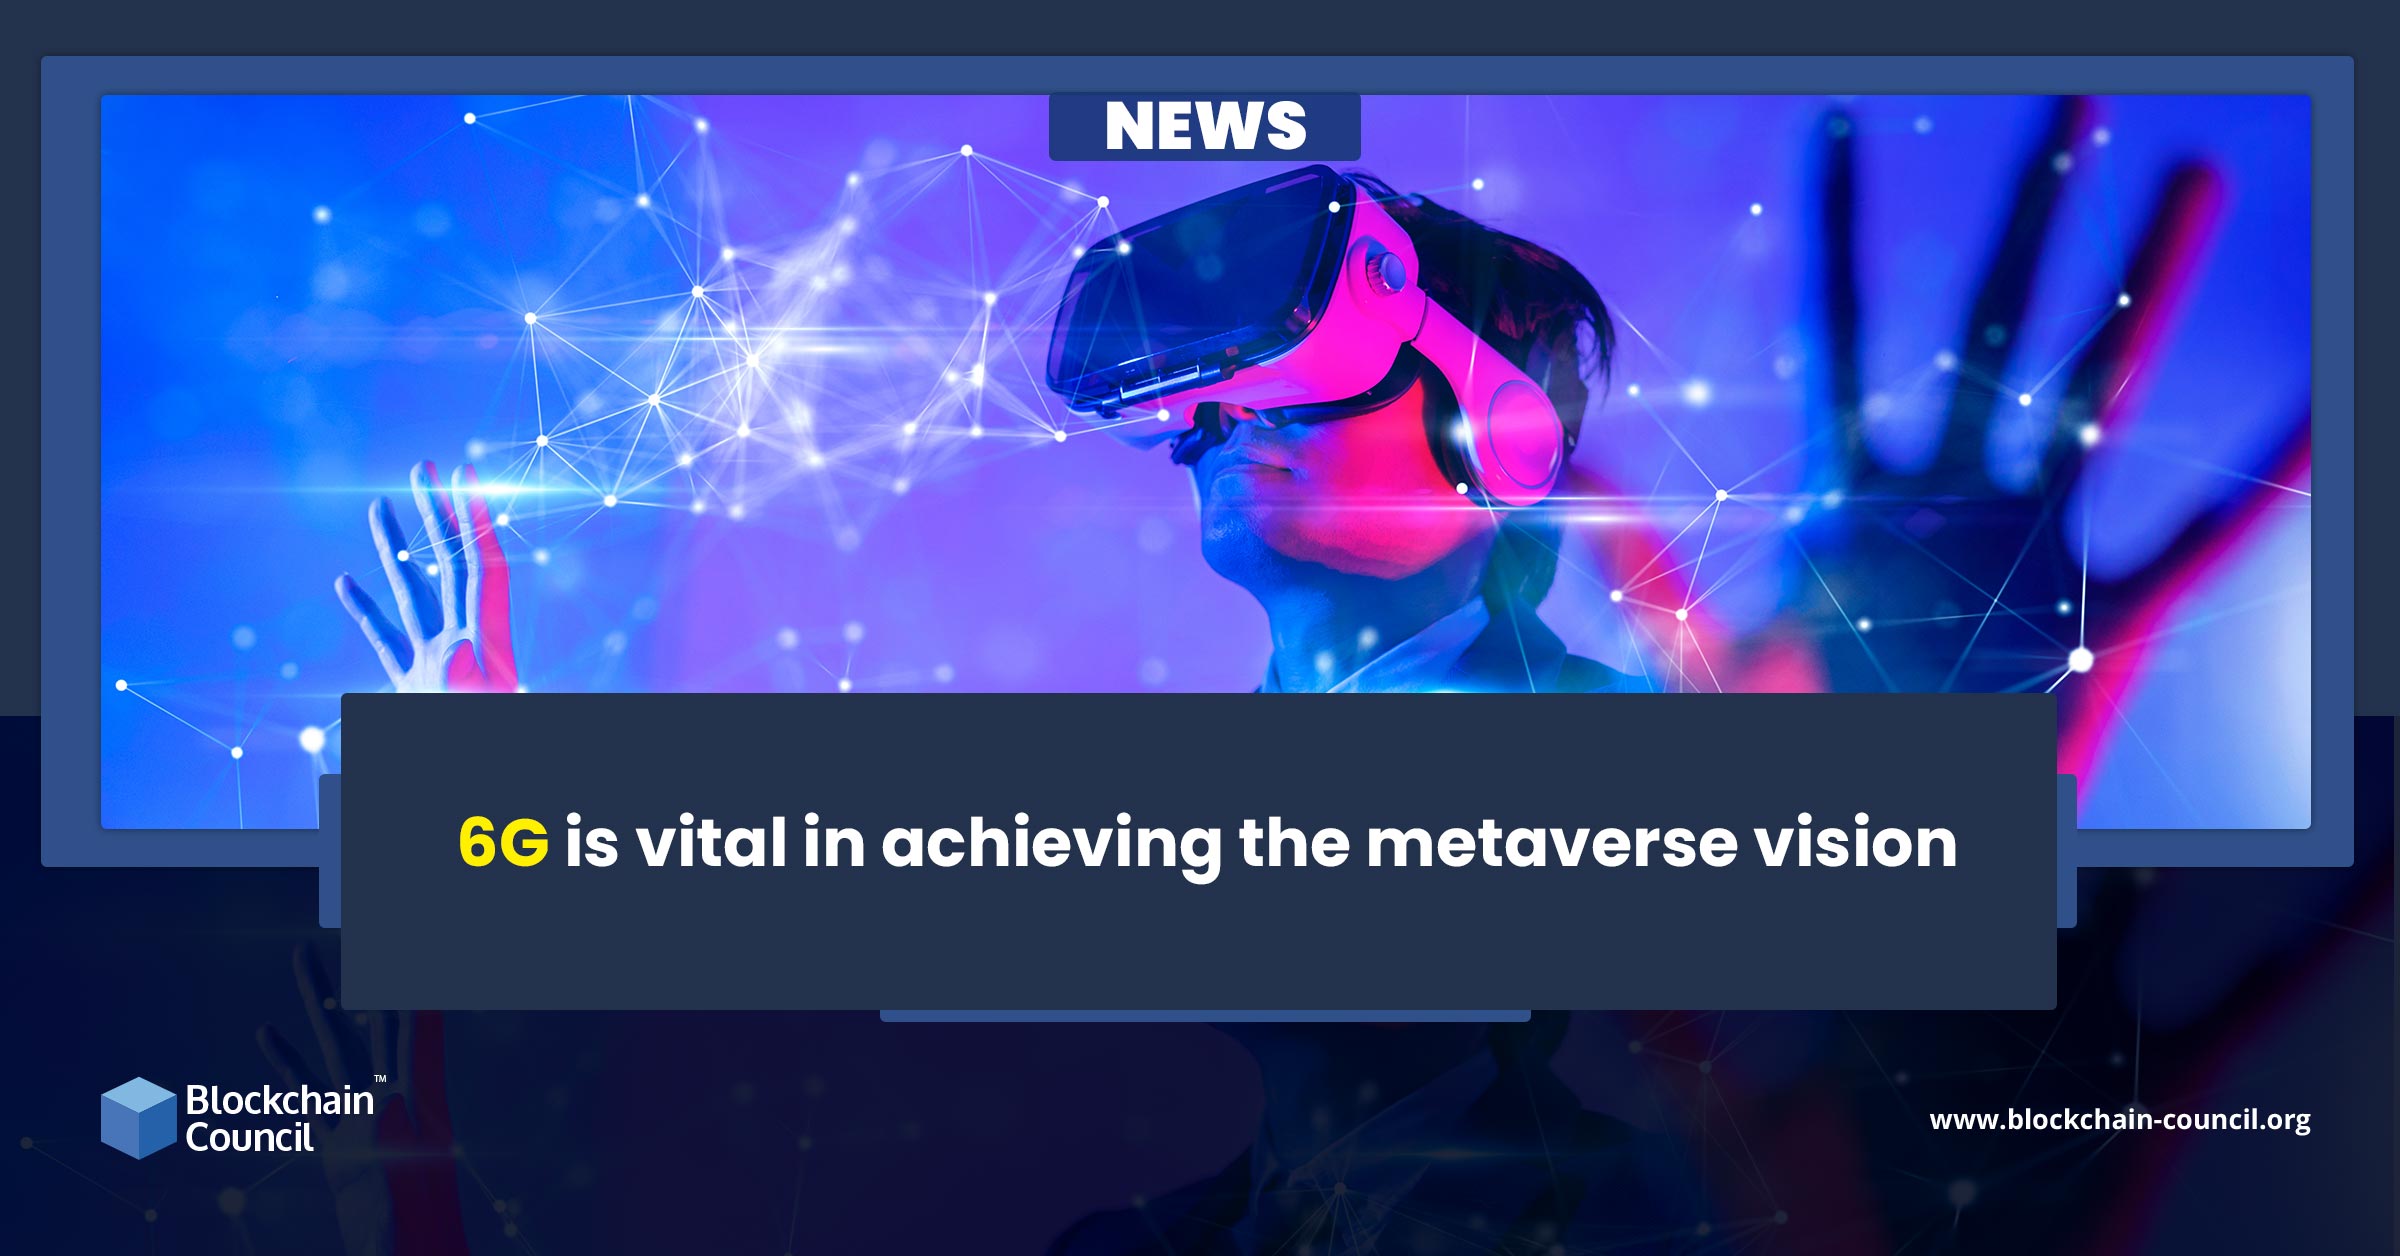 6G is vital in achieving the metaverse vision